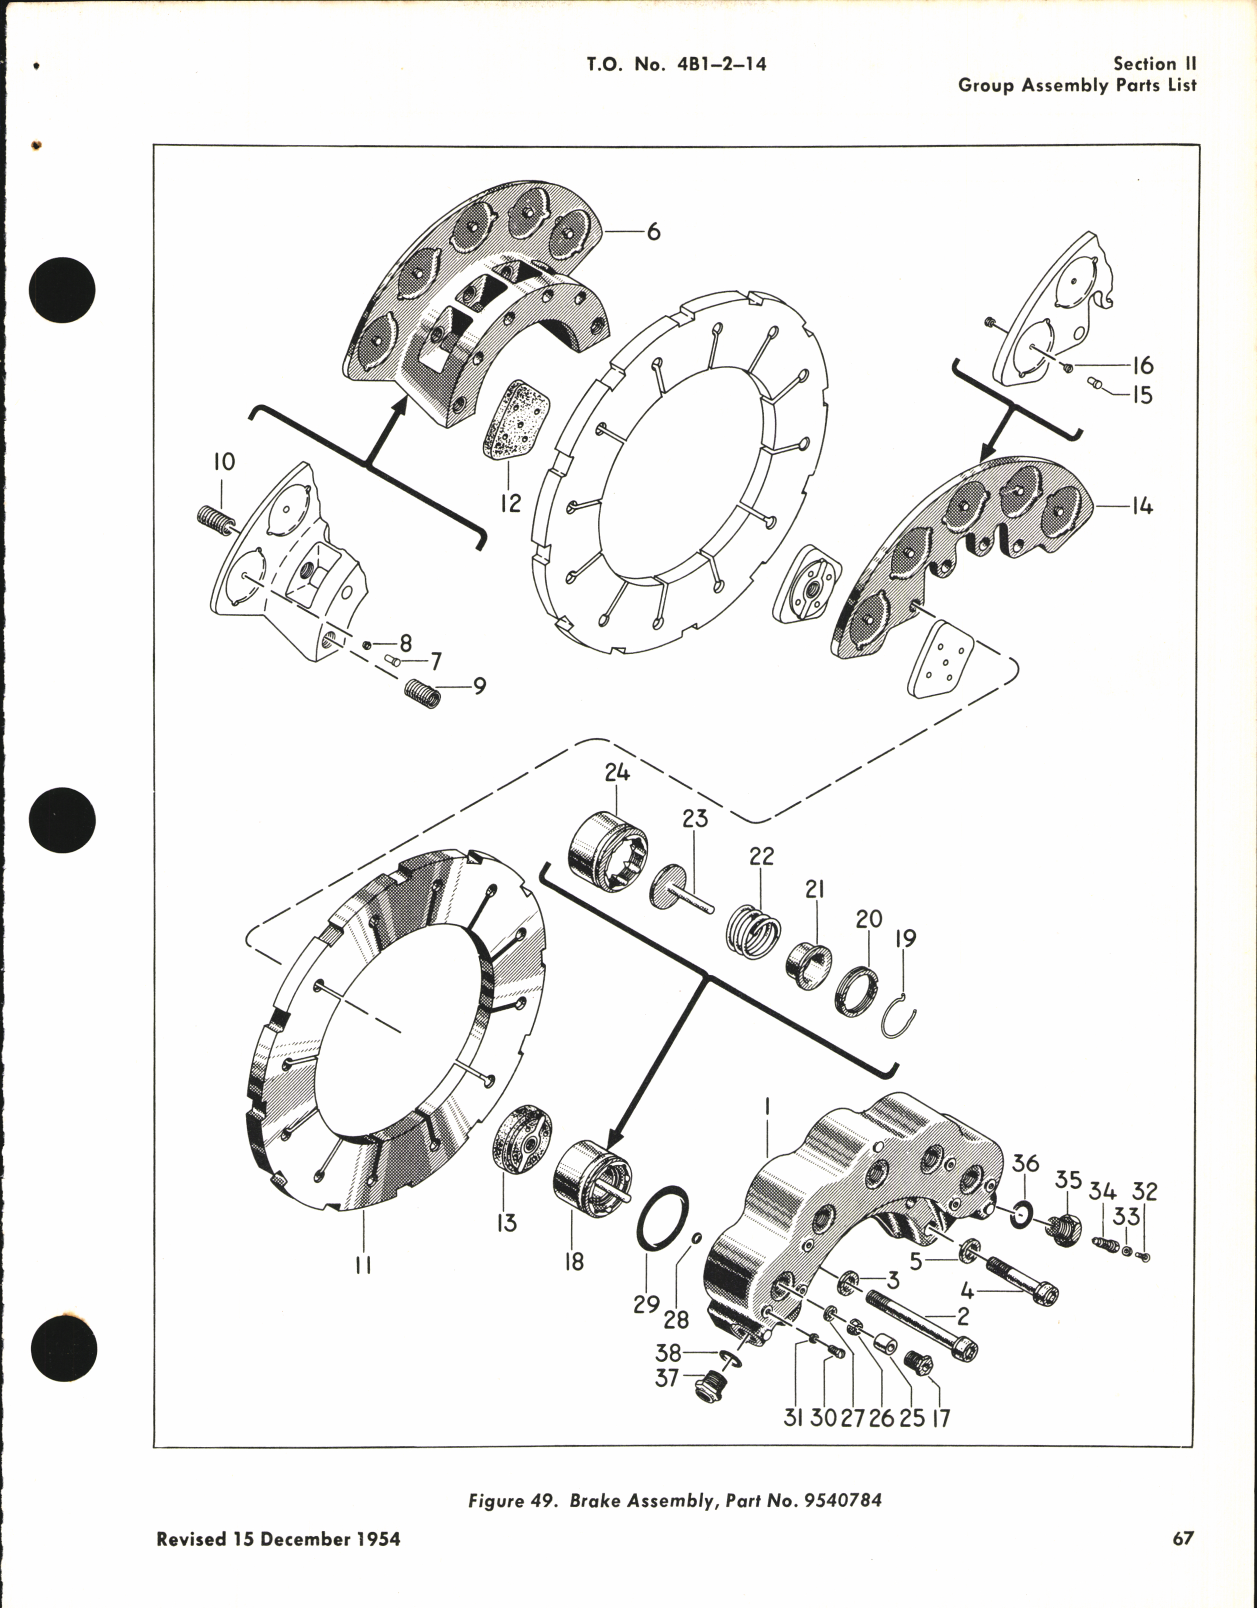 Sample page 7 from AirCorps Library document: Illustrated Parts Breakdown for Single and Dual Disc Brakes (Goodyear)